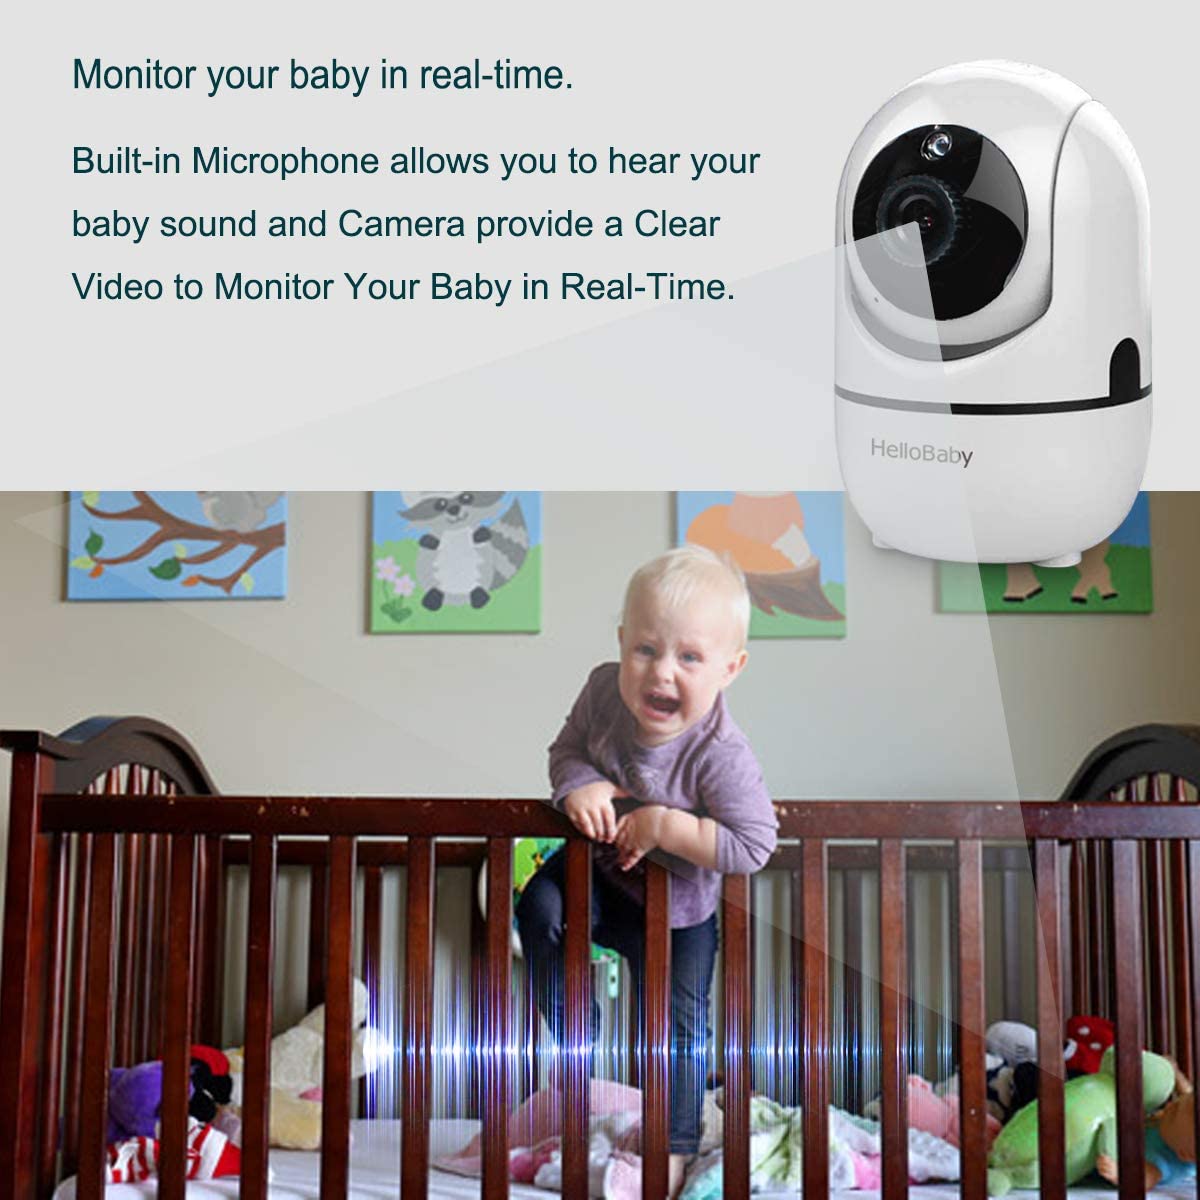 HelloBaby Camera | Add-on Camera for HB65